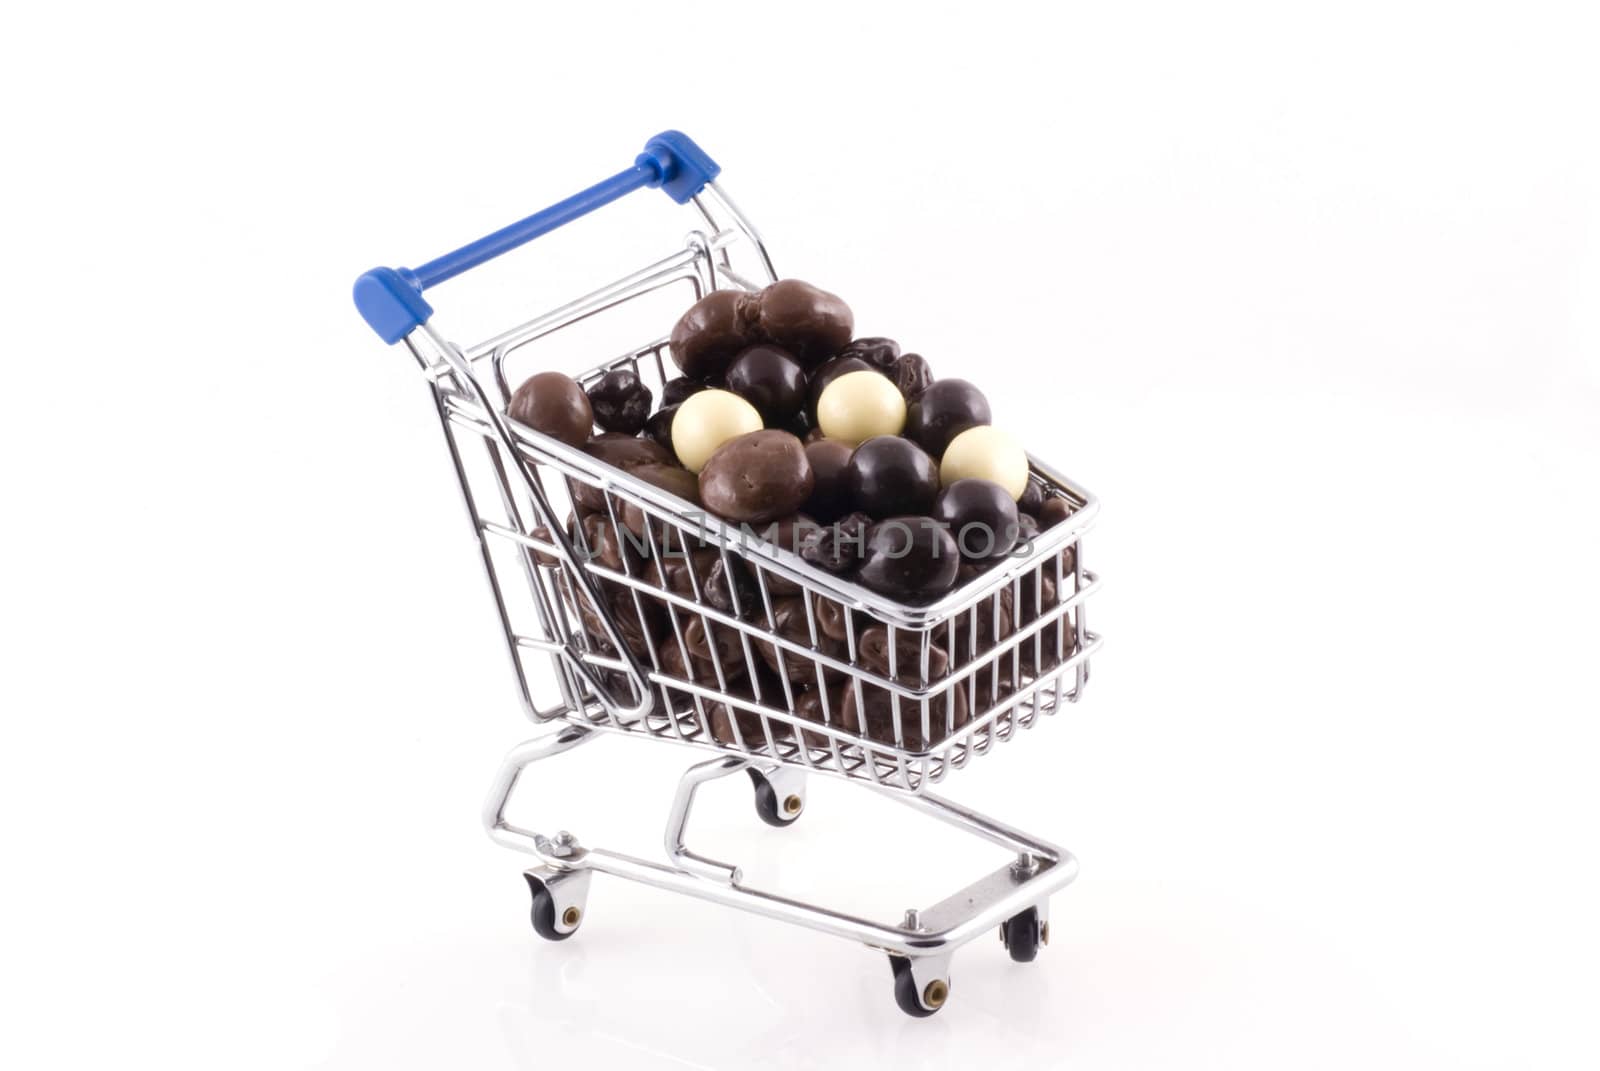 Shopping cart full of chocolate, isolated on white.